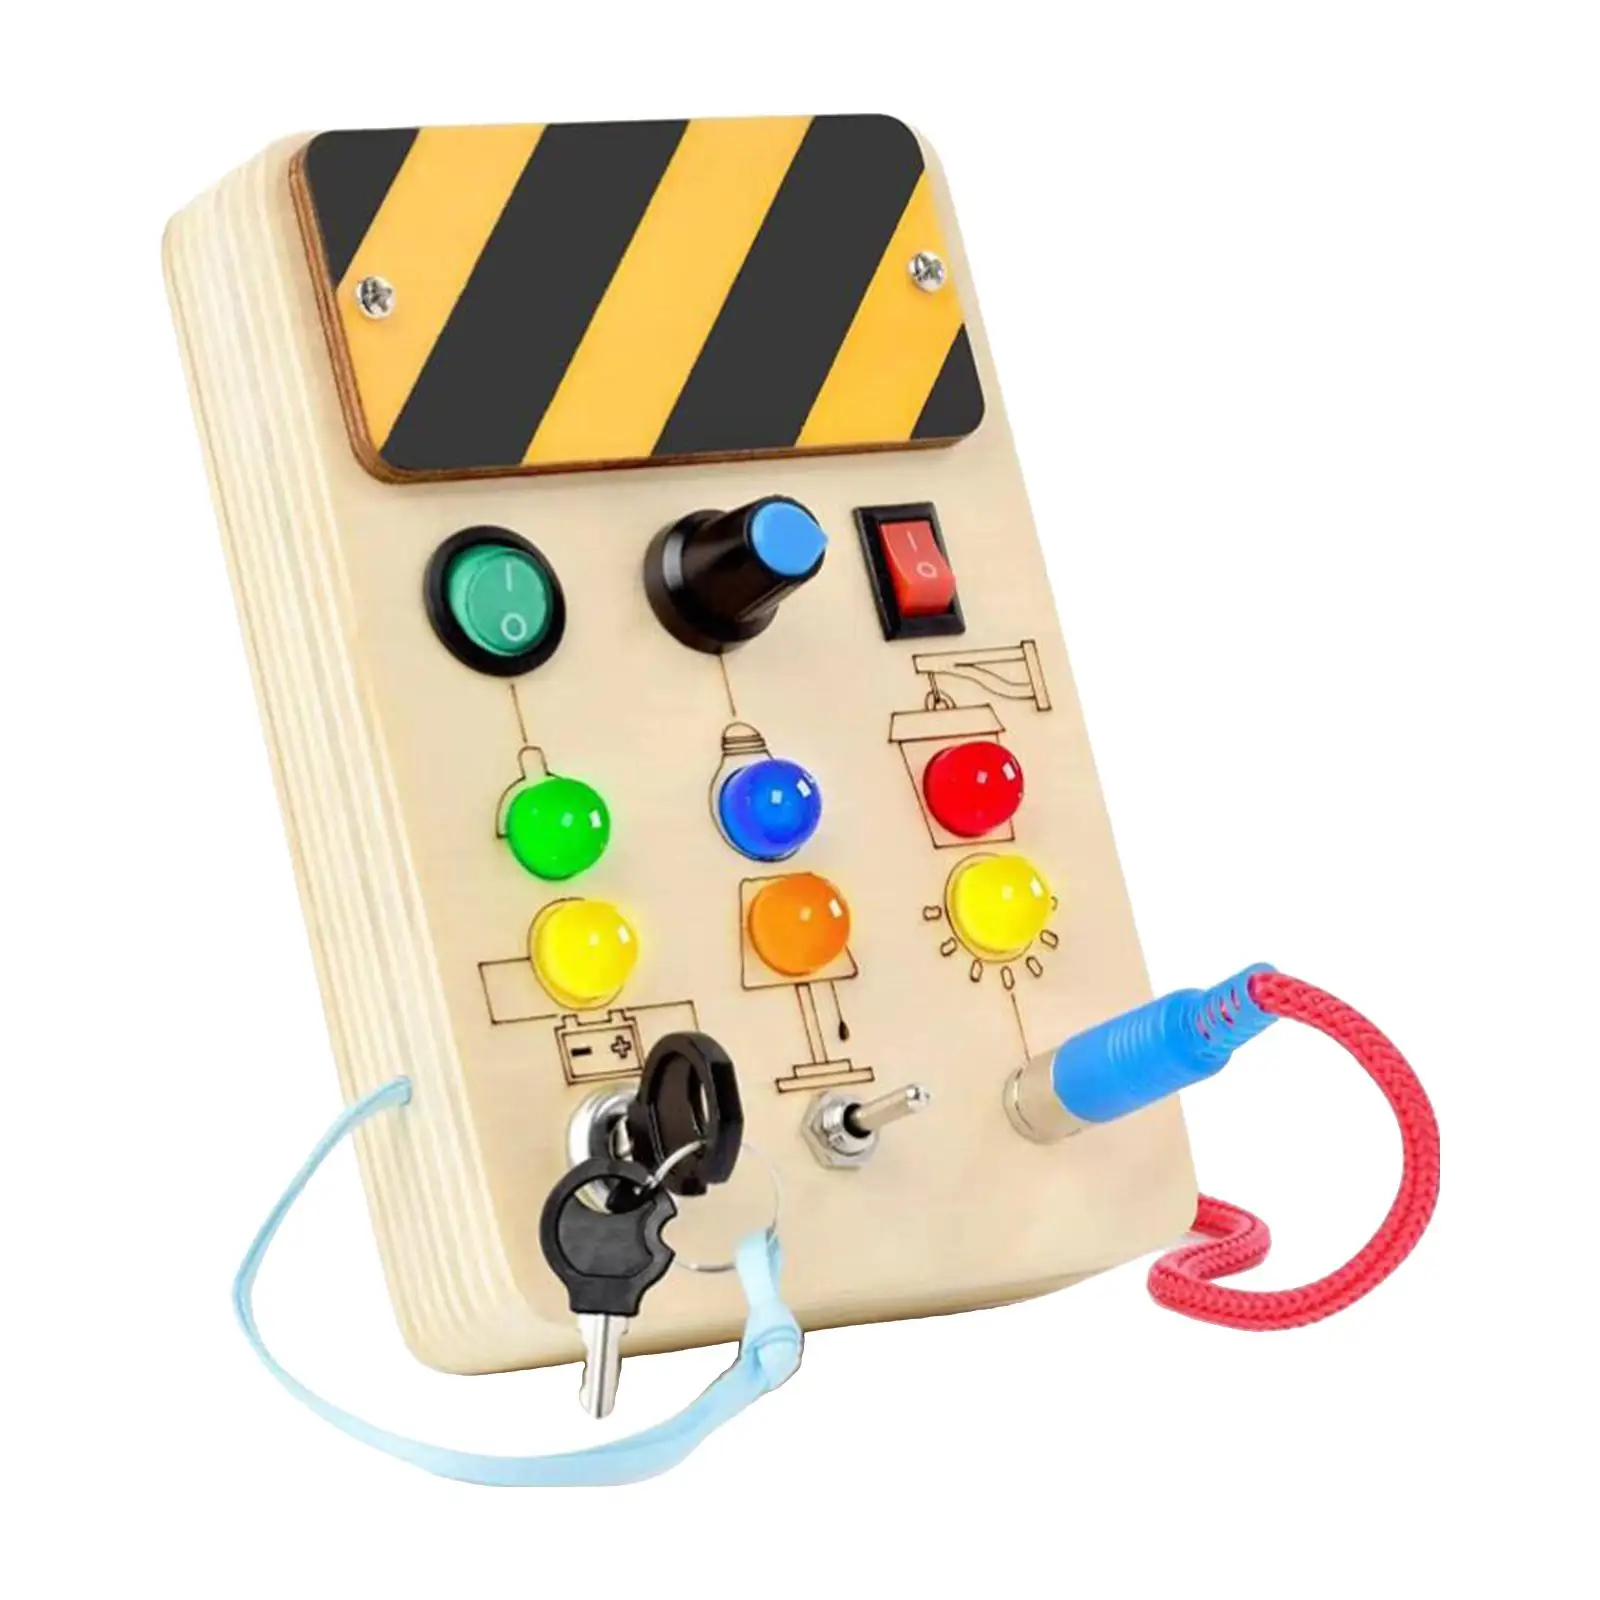 LED Switch Board Activities Toggle Switch Fine Motor Skills for Toddler Kids